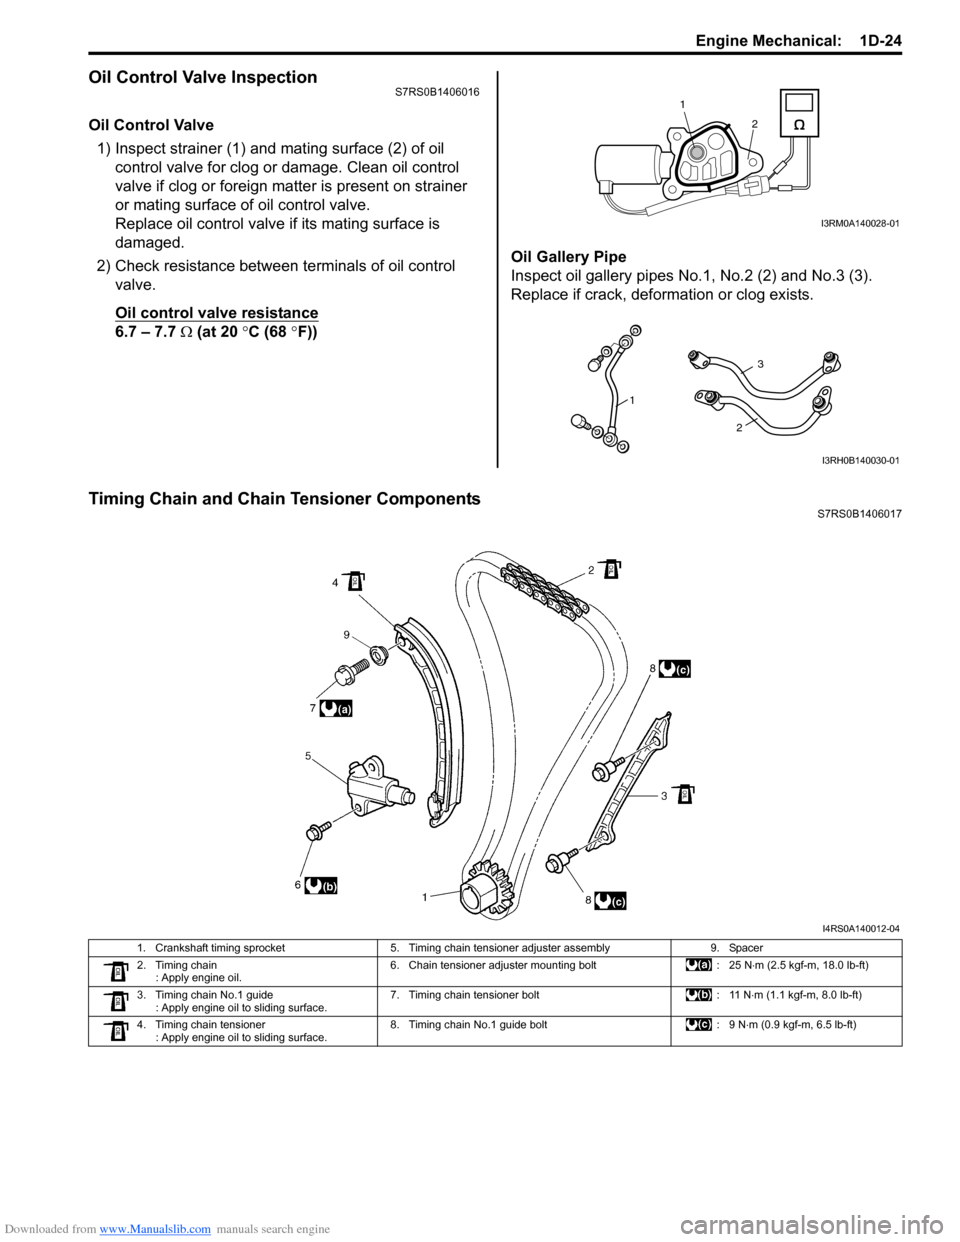 SUZUKI SWIFT 2006 2.G Service User Guide Downloaded from www.Manualslib.com manuals search engine Engine Mechanical:  1D-24
Oil Control Valve InspectionS7RS0B1406016
Oil Control Valve1) Inspect strainer (1) and mating surface (2) of oil  con